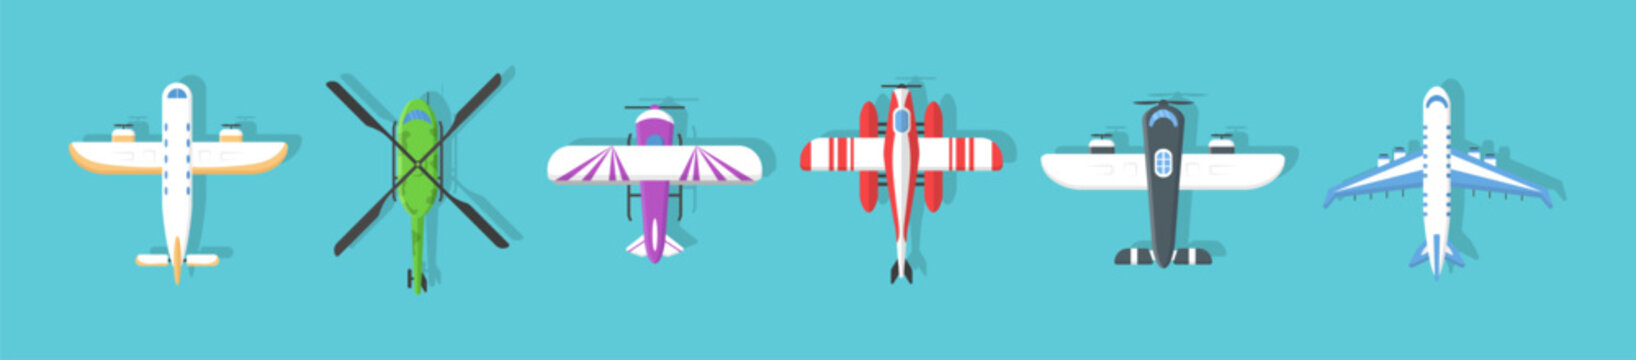 Travel transportation airliner top view. Engine wing vehicle adventure plane concept. Set of flying planes, airplane or aeroplane in flat design. Business aviation transport. Vector illustration.